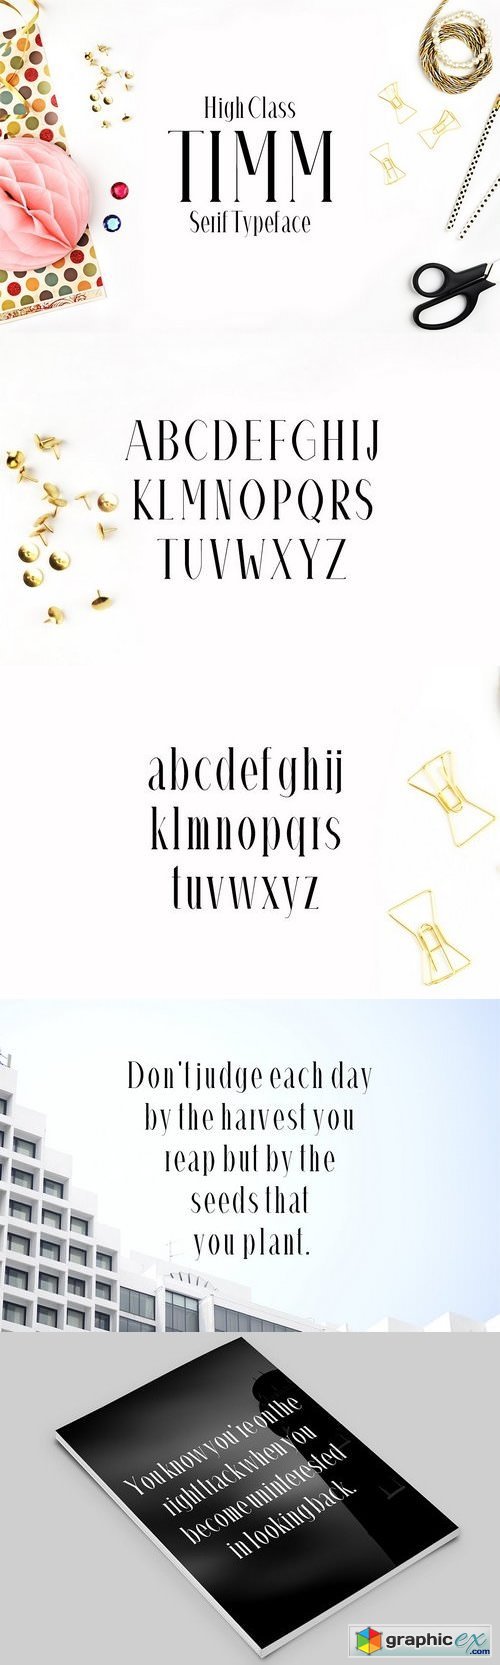 Timm Serif 4 Font Family Pack